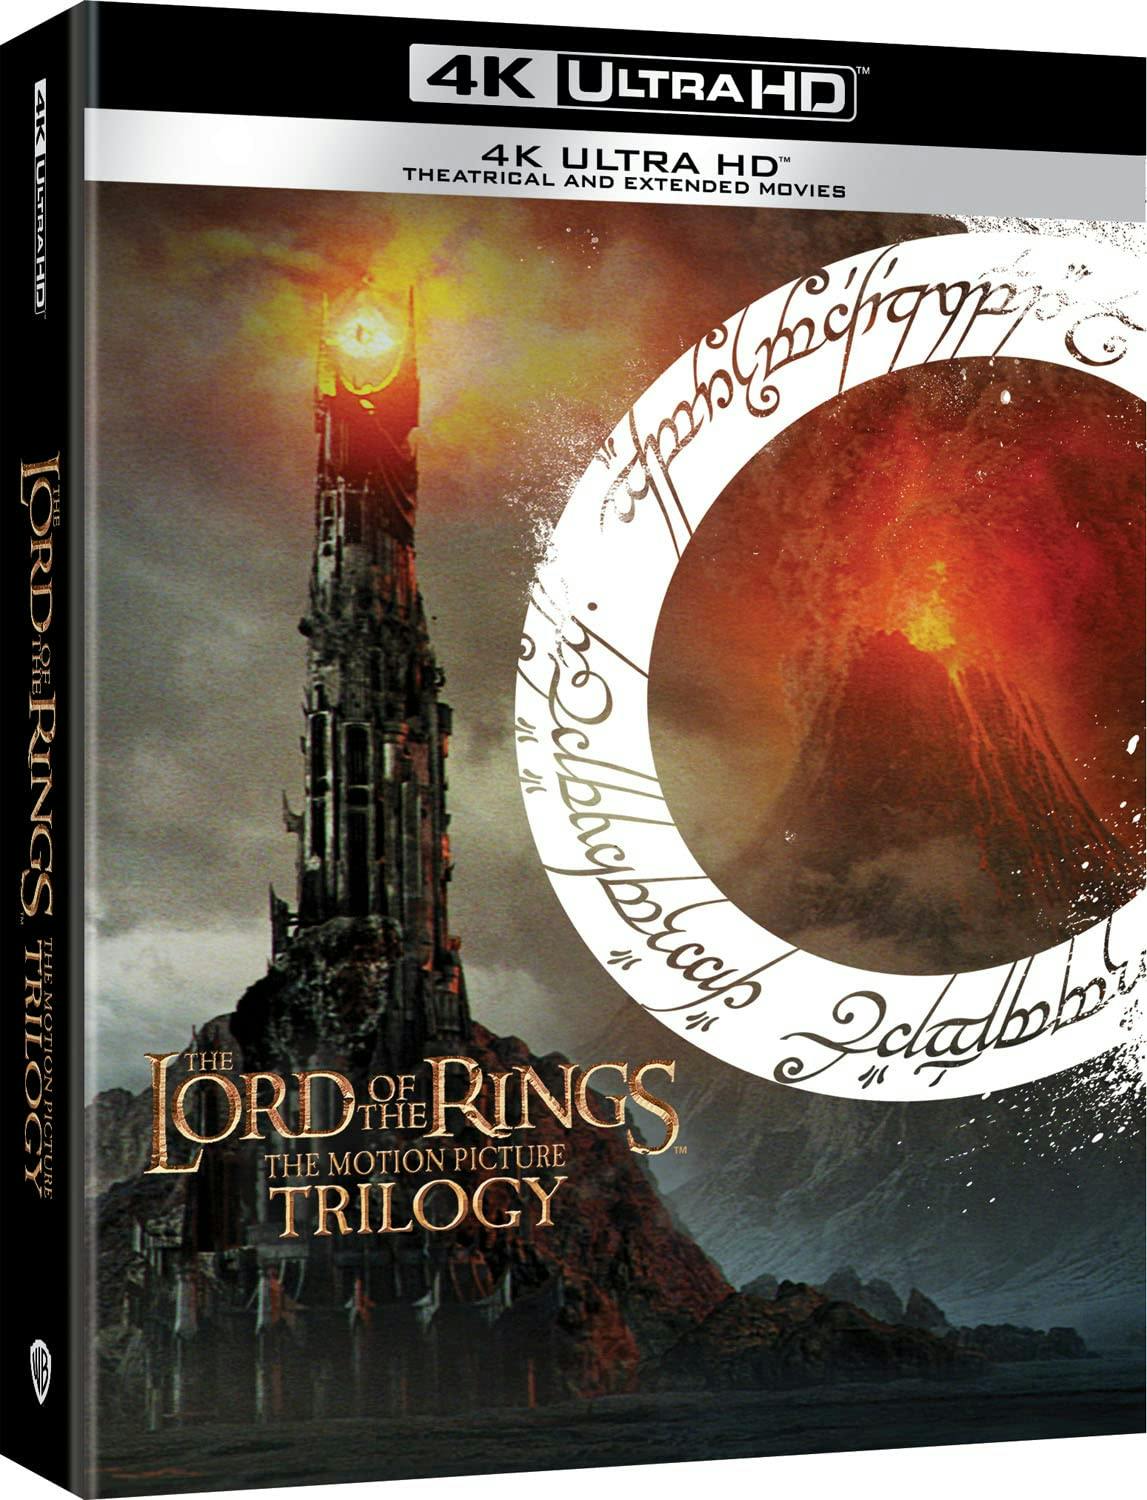 YESASIA: The Lord of The Rings - The Fellowship of The Ring (2001) (DVD)  (2- Disc Edition) (Hong Kong Version) DVD - Orlando Bloom, Ian McKellen,  Deltamac (HK) - Western / World